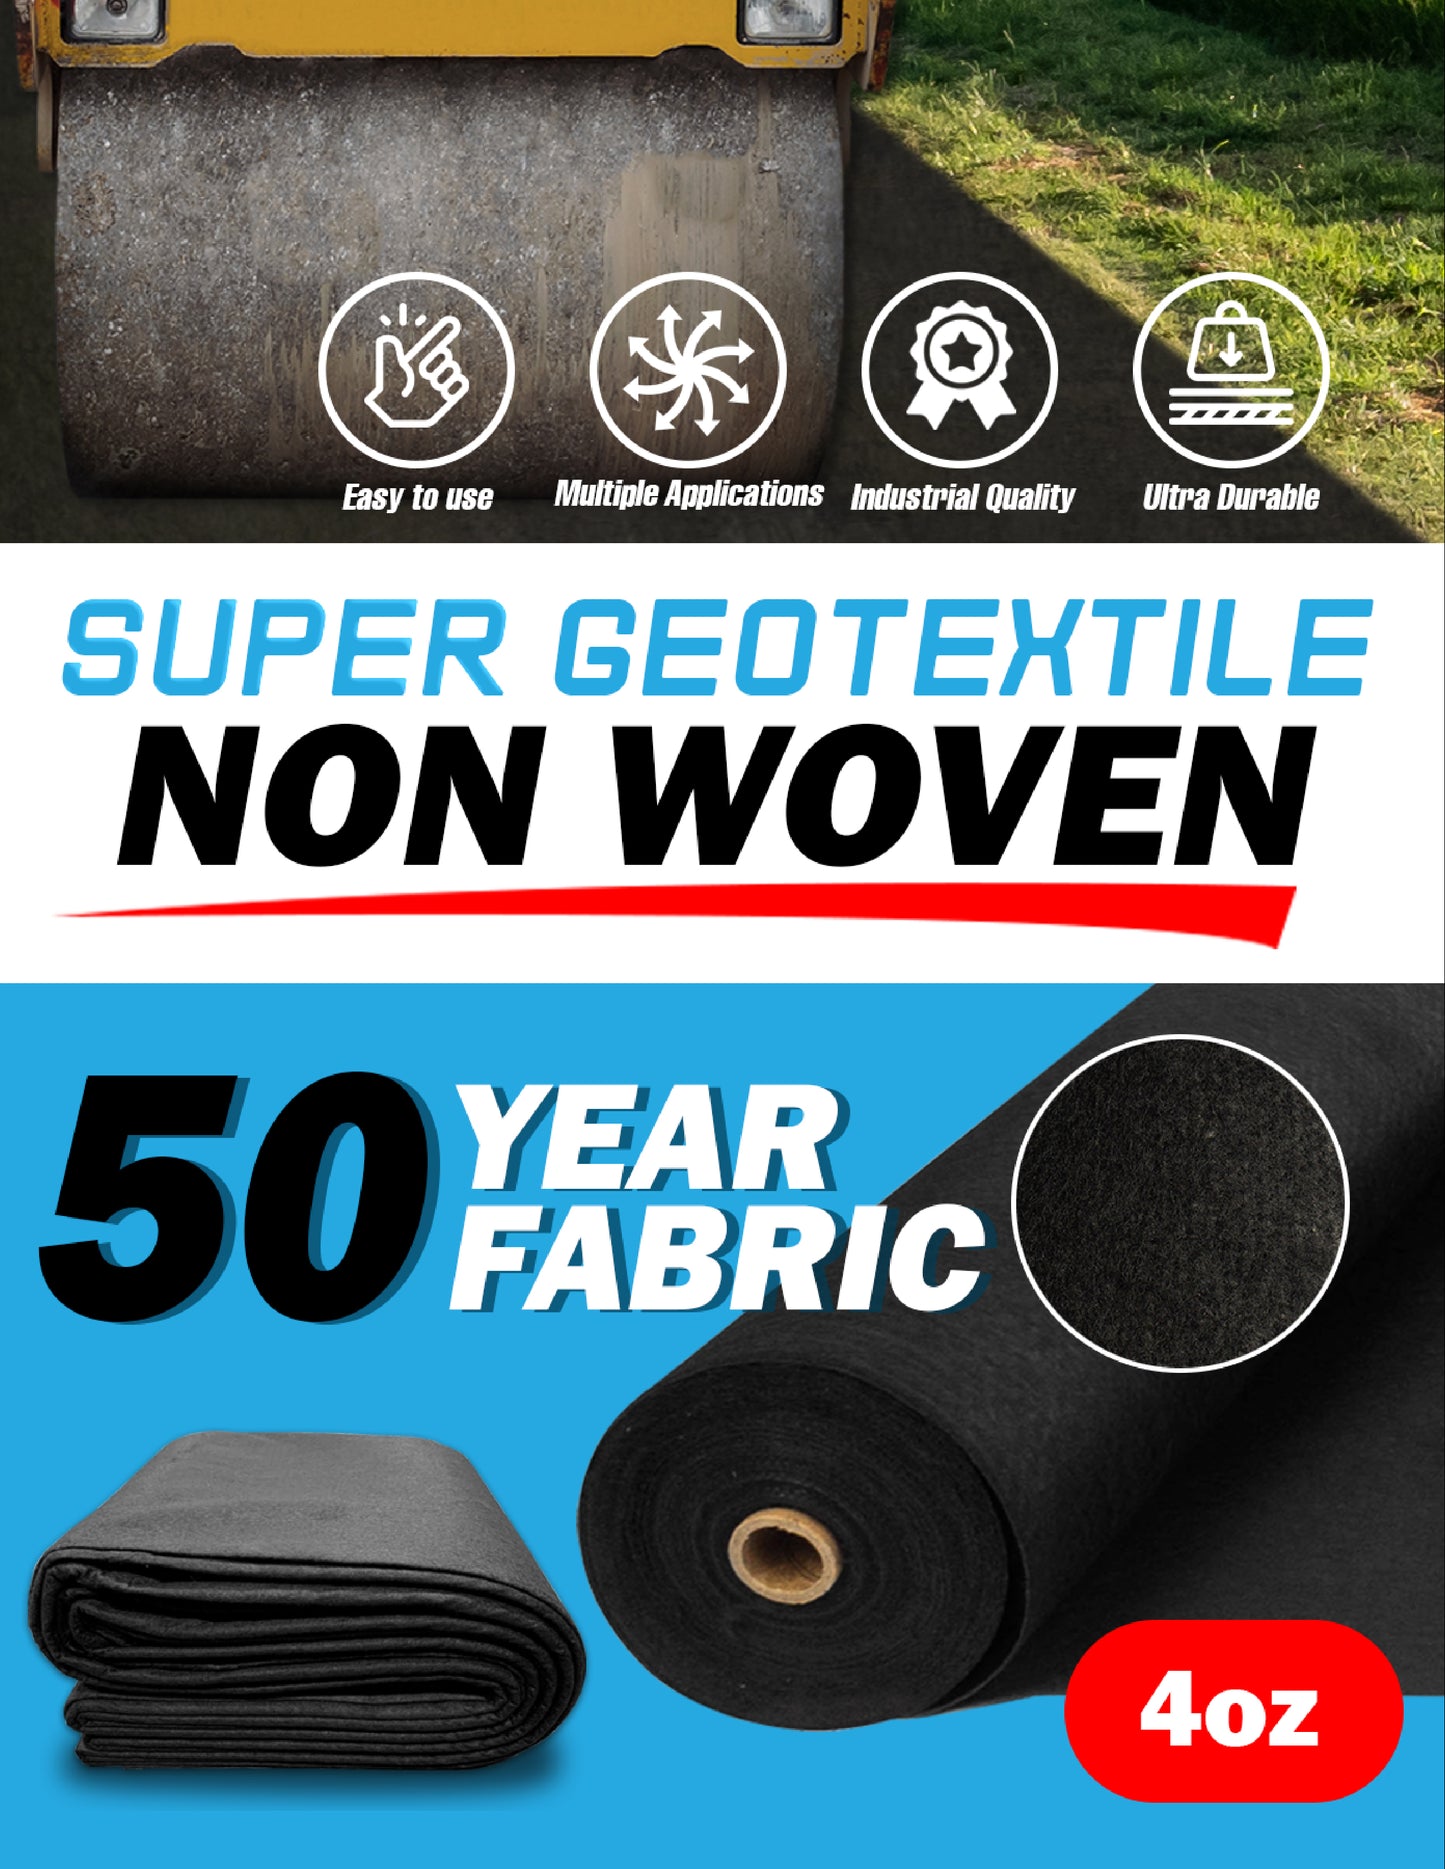 4 oz Non Woven Needle Punched Geotextile Filter Fabric - 50 Year Fabric